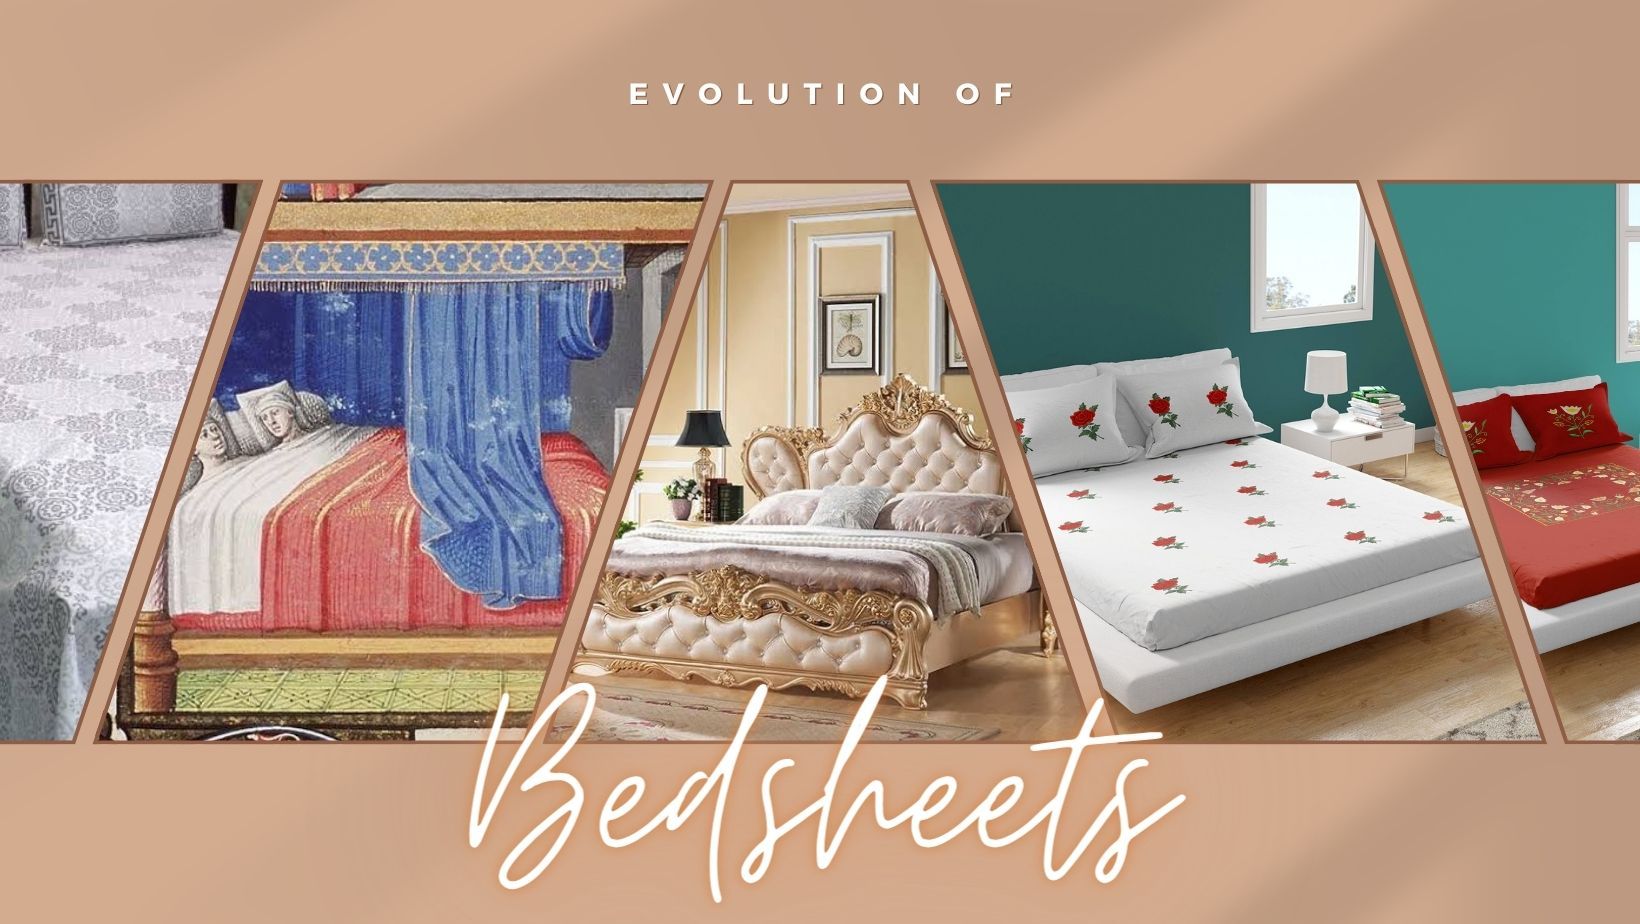 The Art of Handcrafted Bedsheets: A Journey Through Time